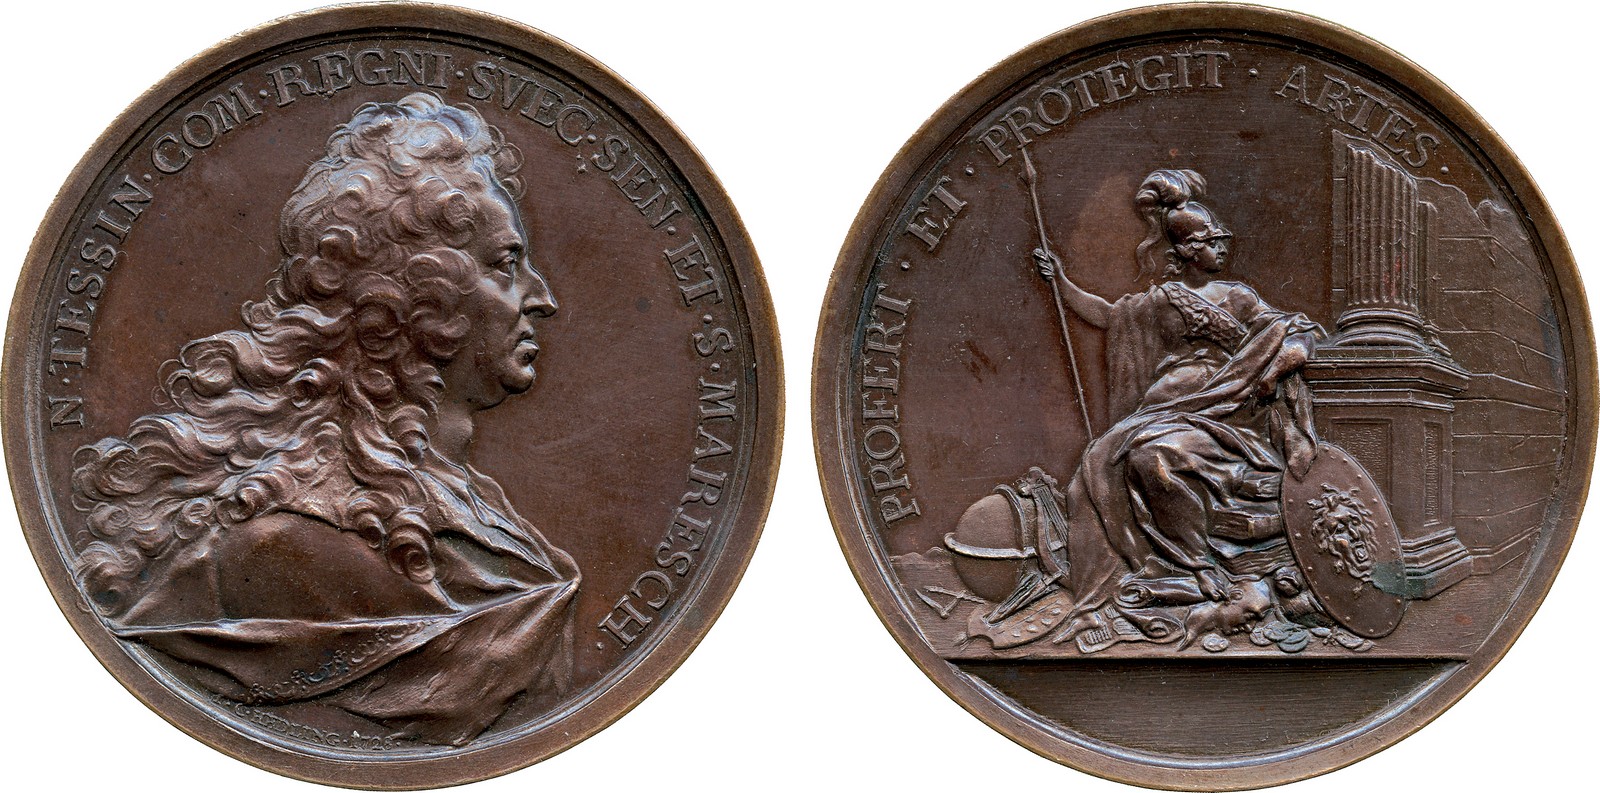 COMMEMORATIVE MEDALS, WORLD MEDALS, Sweden, Count Nicodemus Tessin, the Younger (1654-1728), Baroque